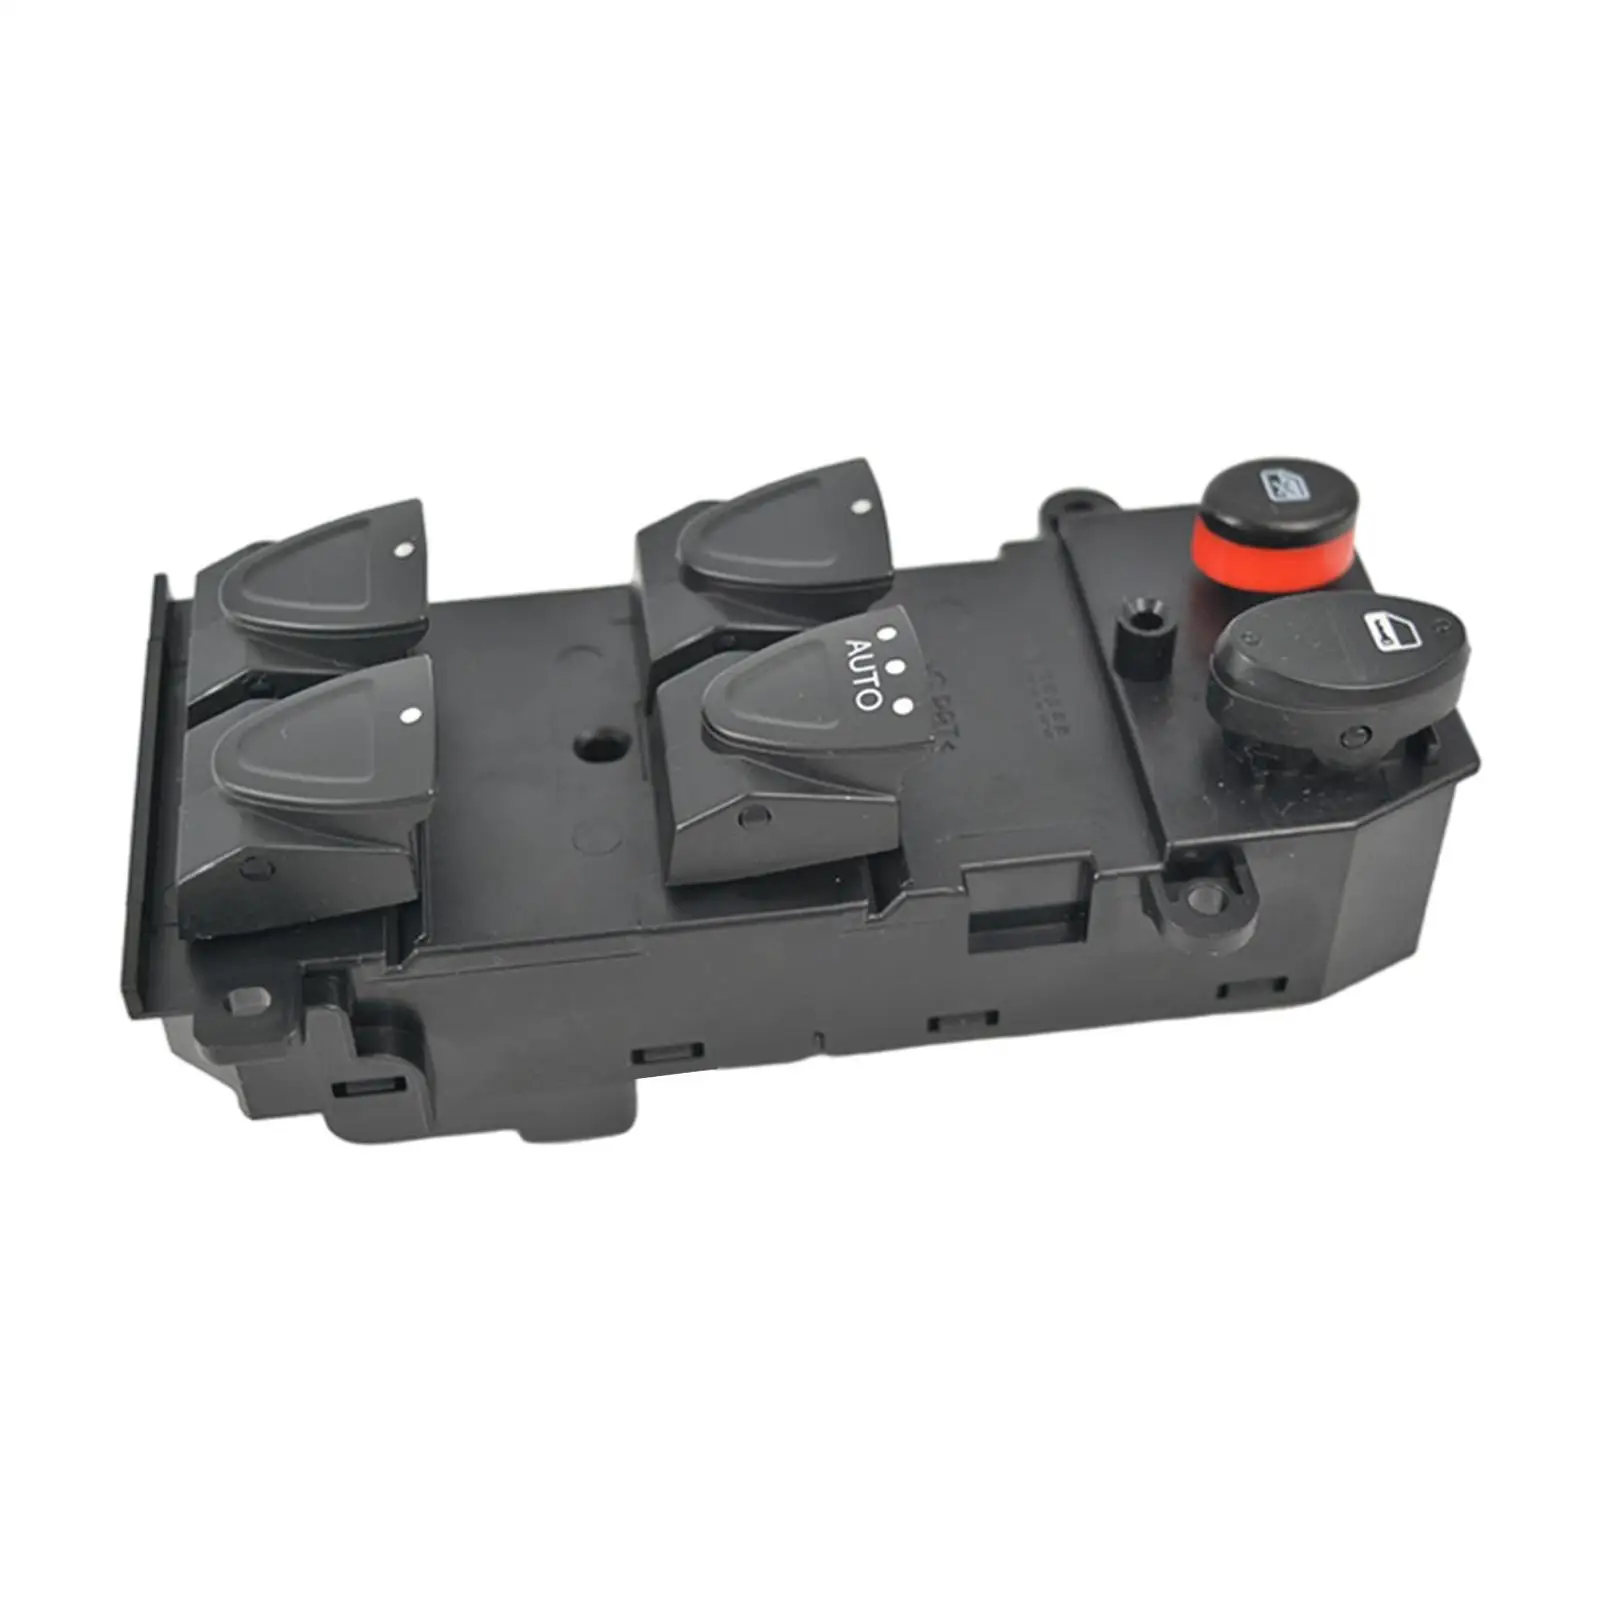 Front Window Control Switch 35750-Snb-Rhd Spare  Replaces Professional for Premium Easy to Install Durable